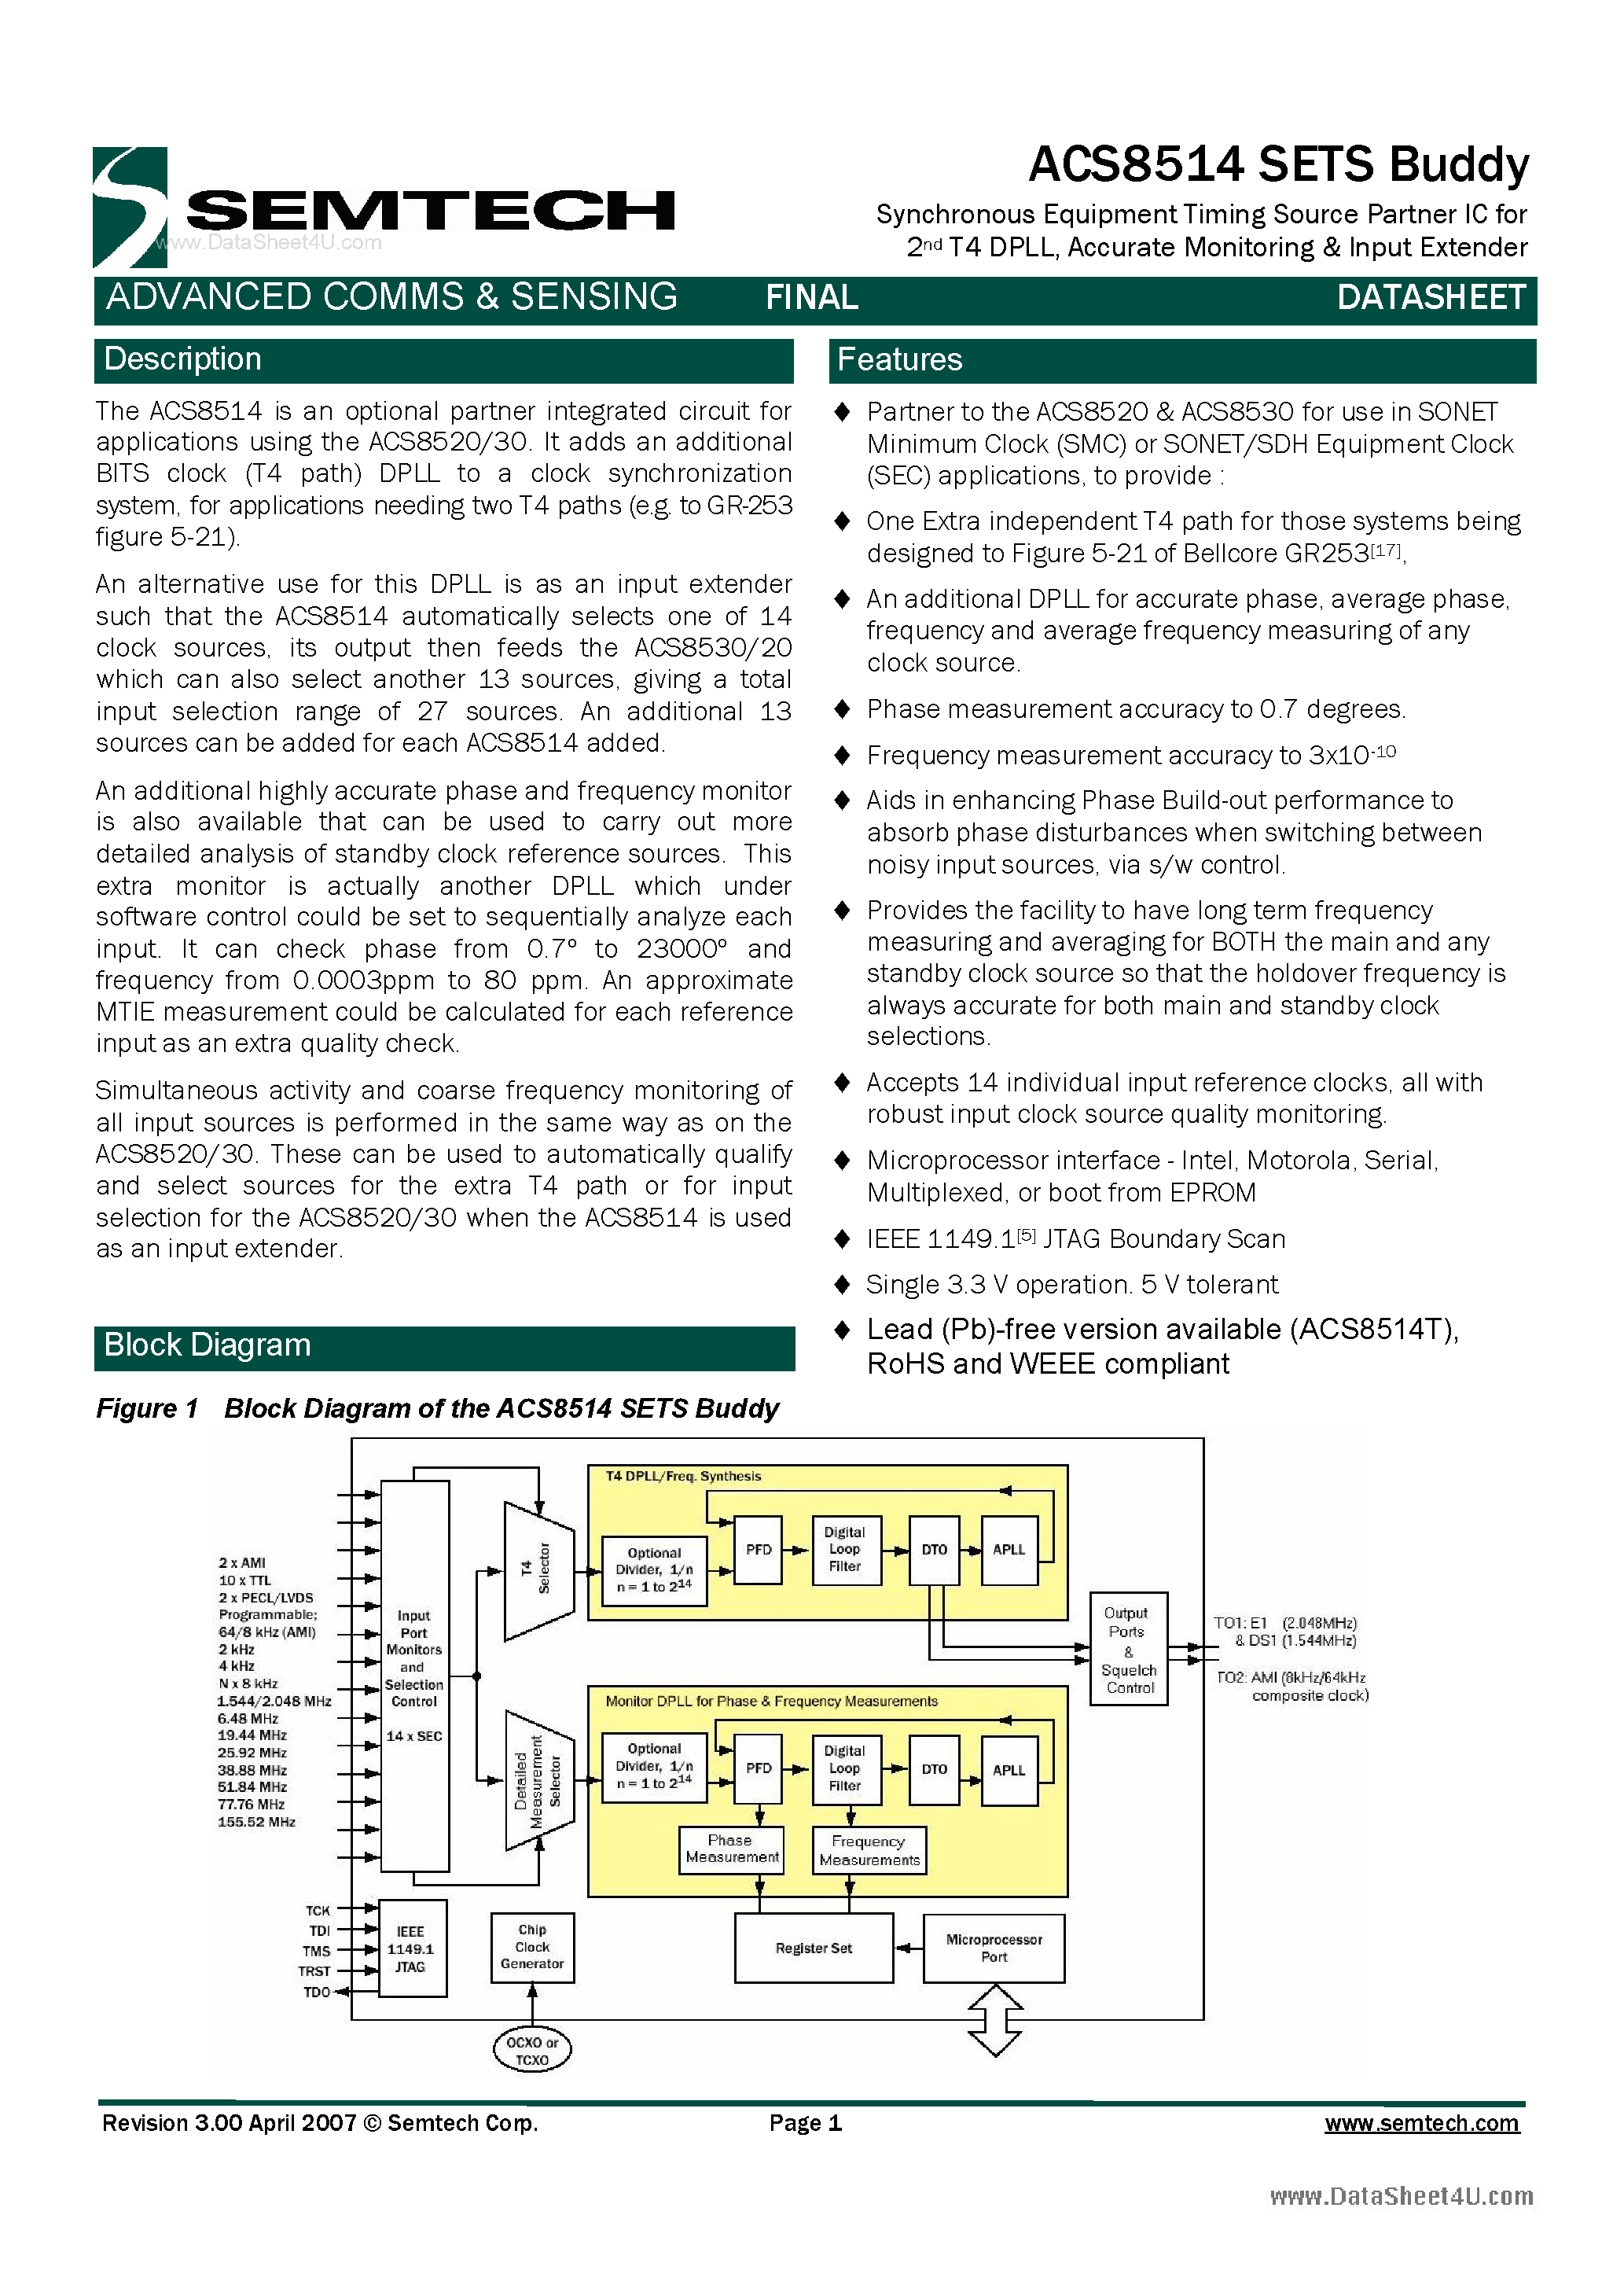 Datasheet ACS8514 - Synchronous Equipment Timing Source Partner IC page 1